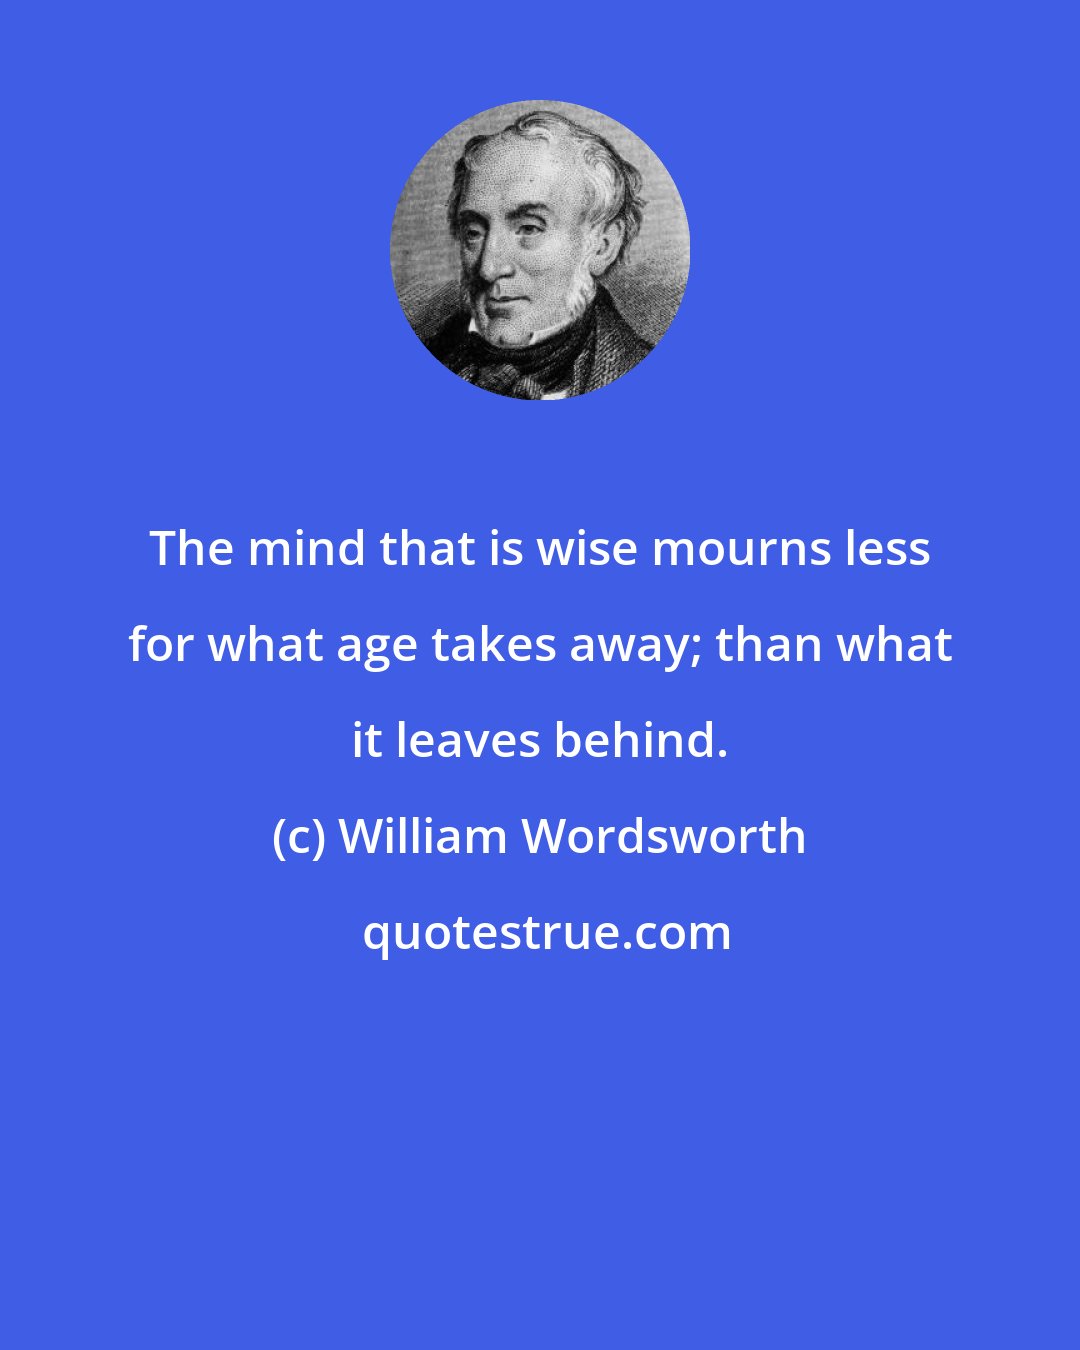 William Wordsworth: The mind that is wise mourns less for what age takes away; than what it leaves behind.